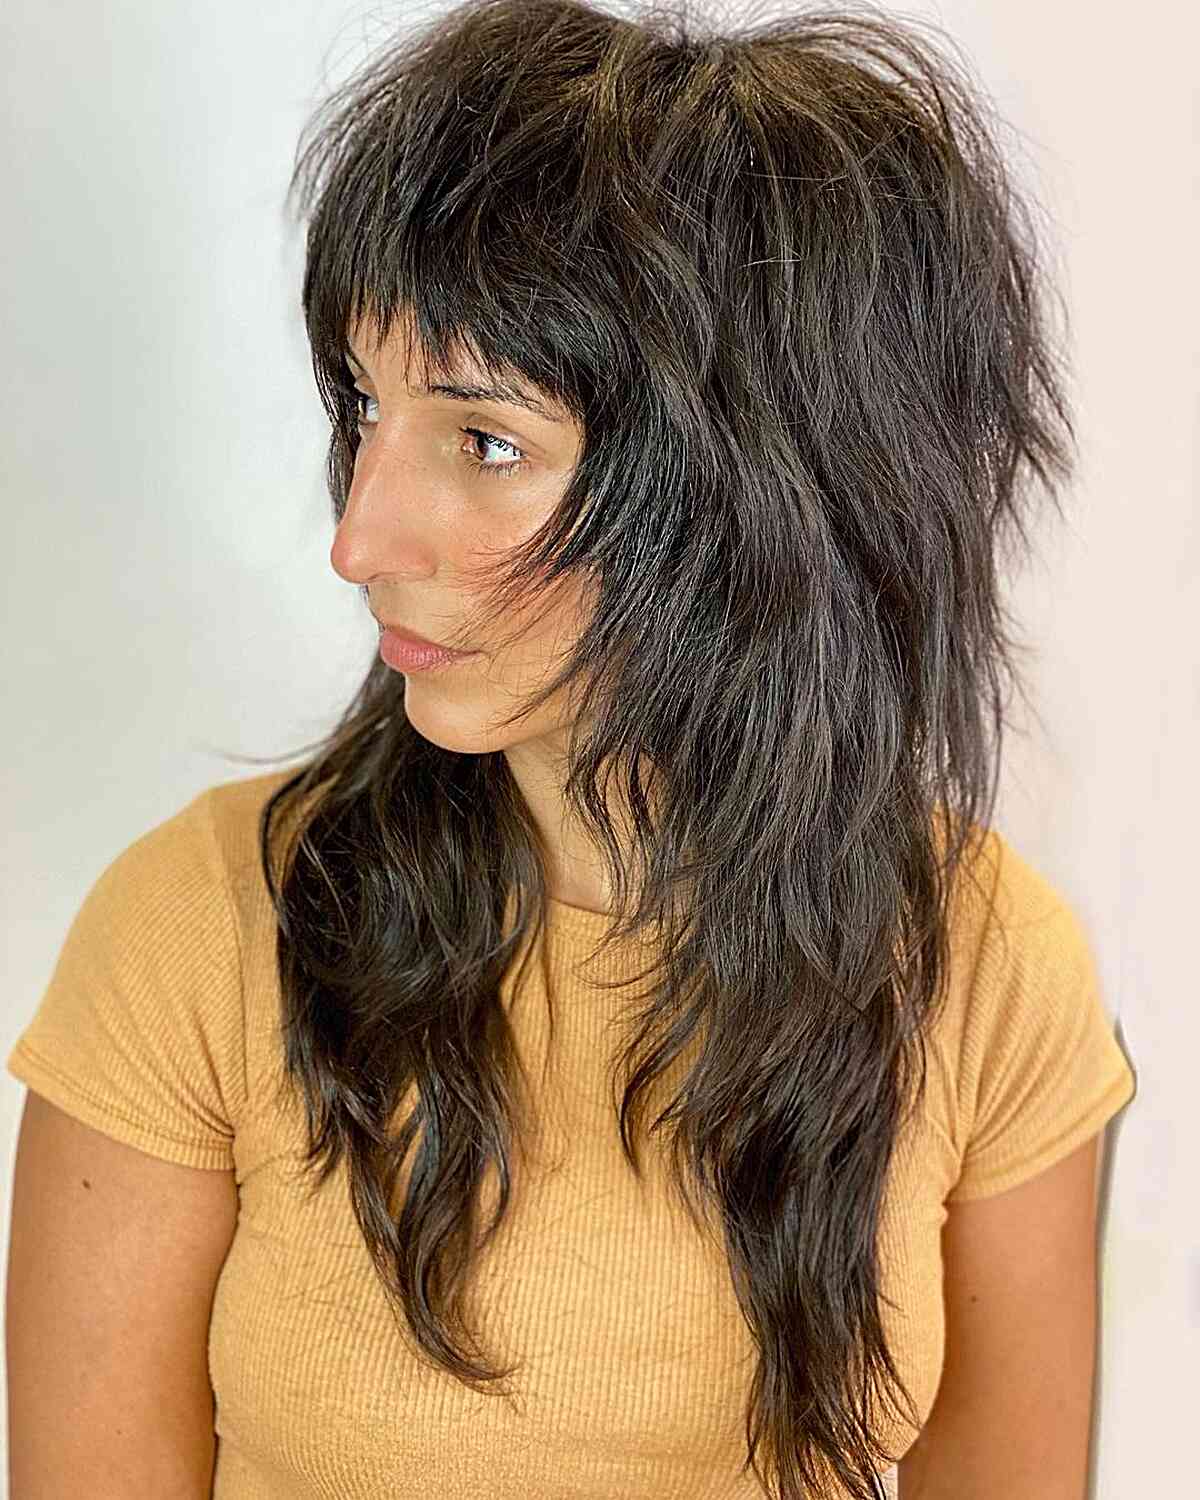 60s-Inspired Long Shaggy Cut for Thick Hair and for ladies with layered hair